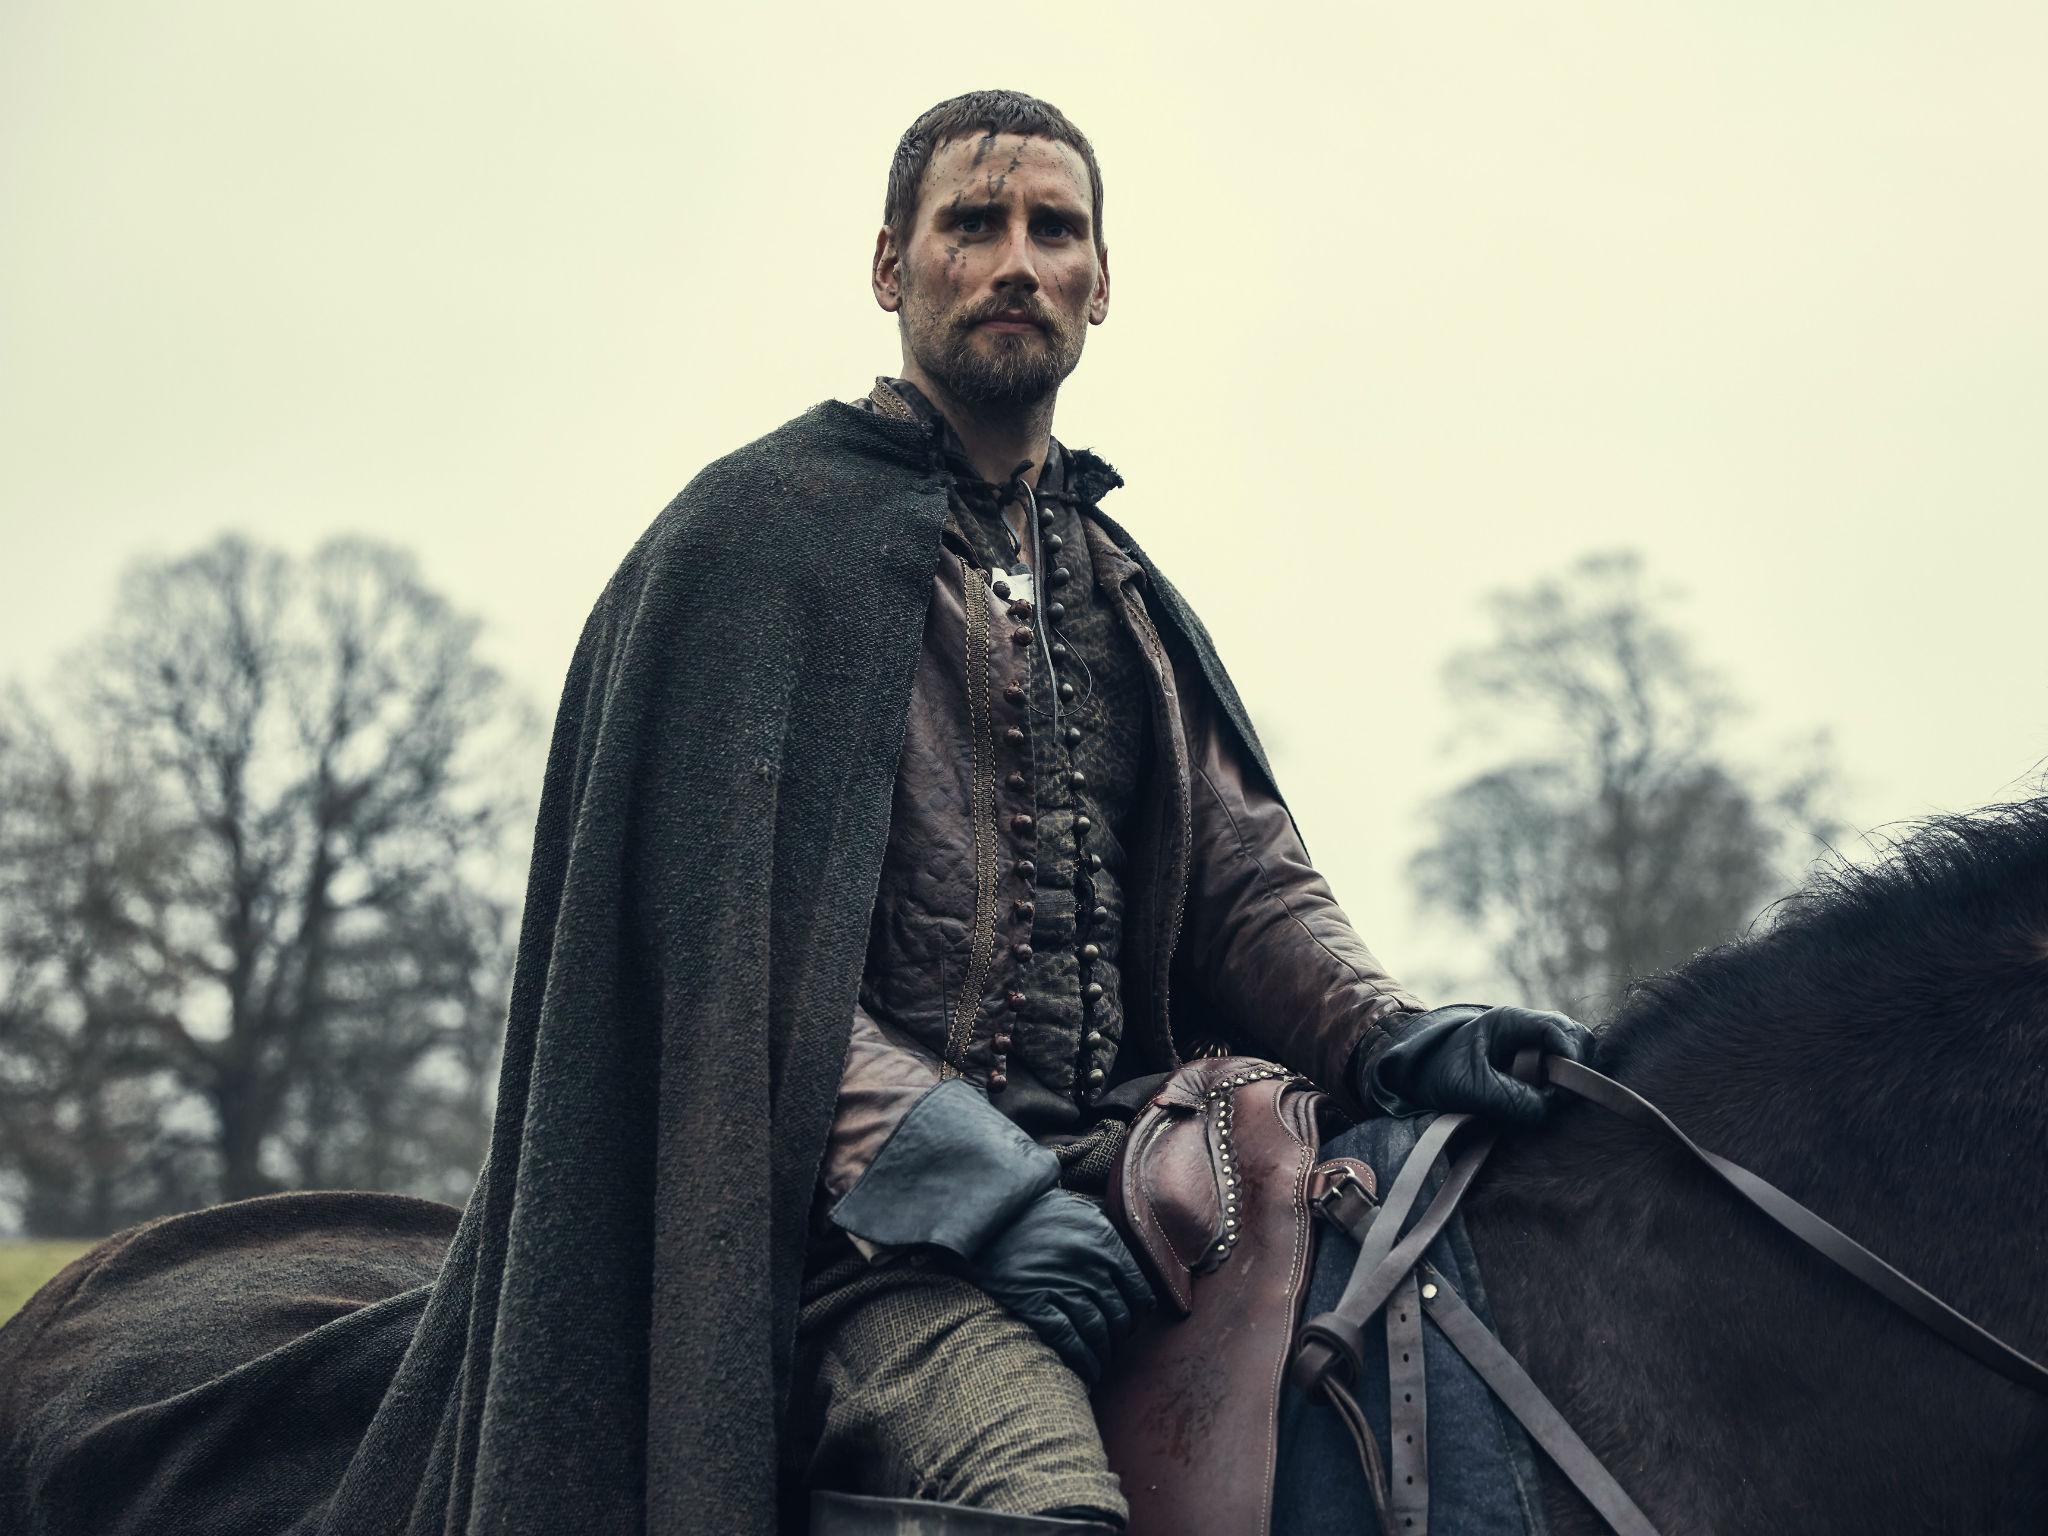 The actor as Thomas Wintour in the recent BBC series ‘Gunpowder’